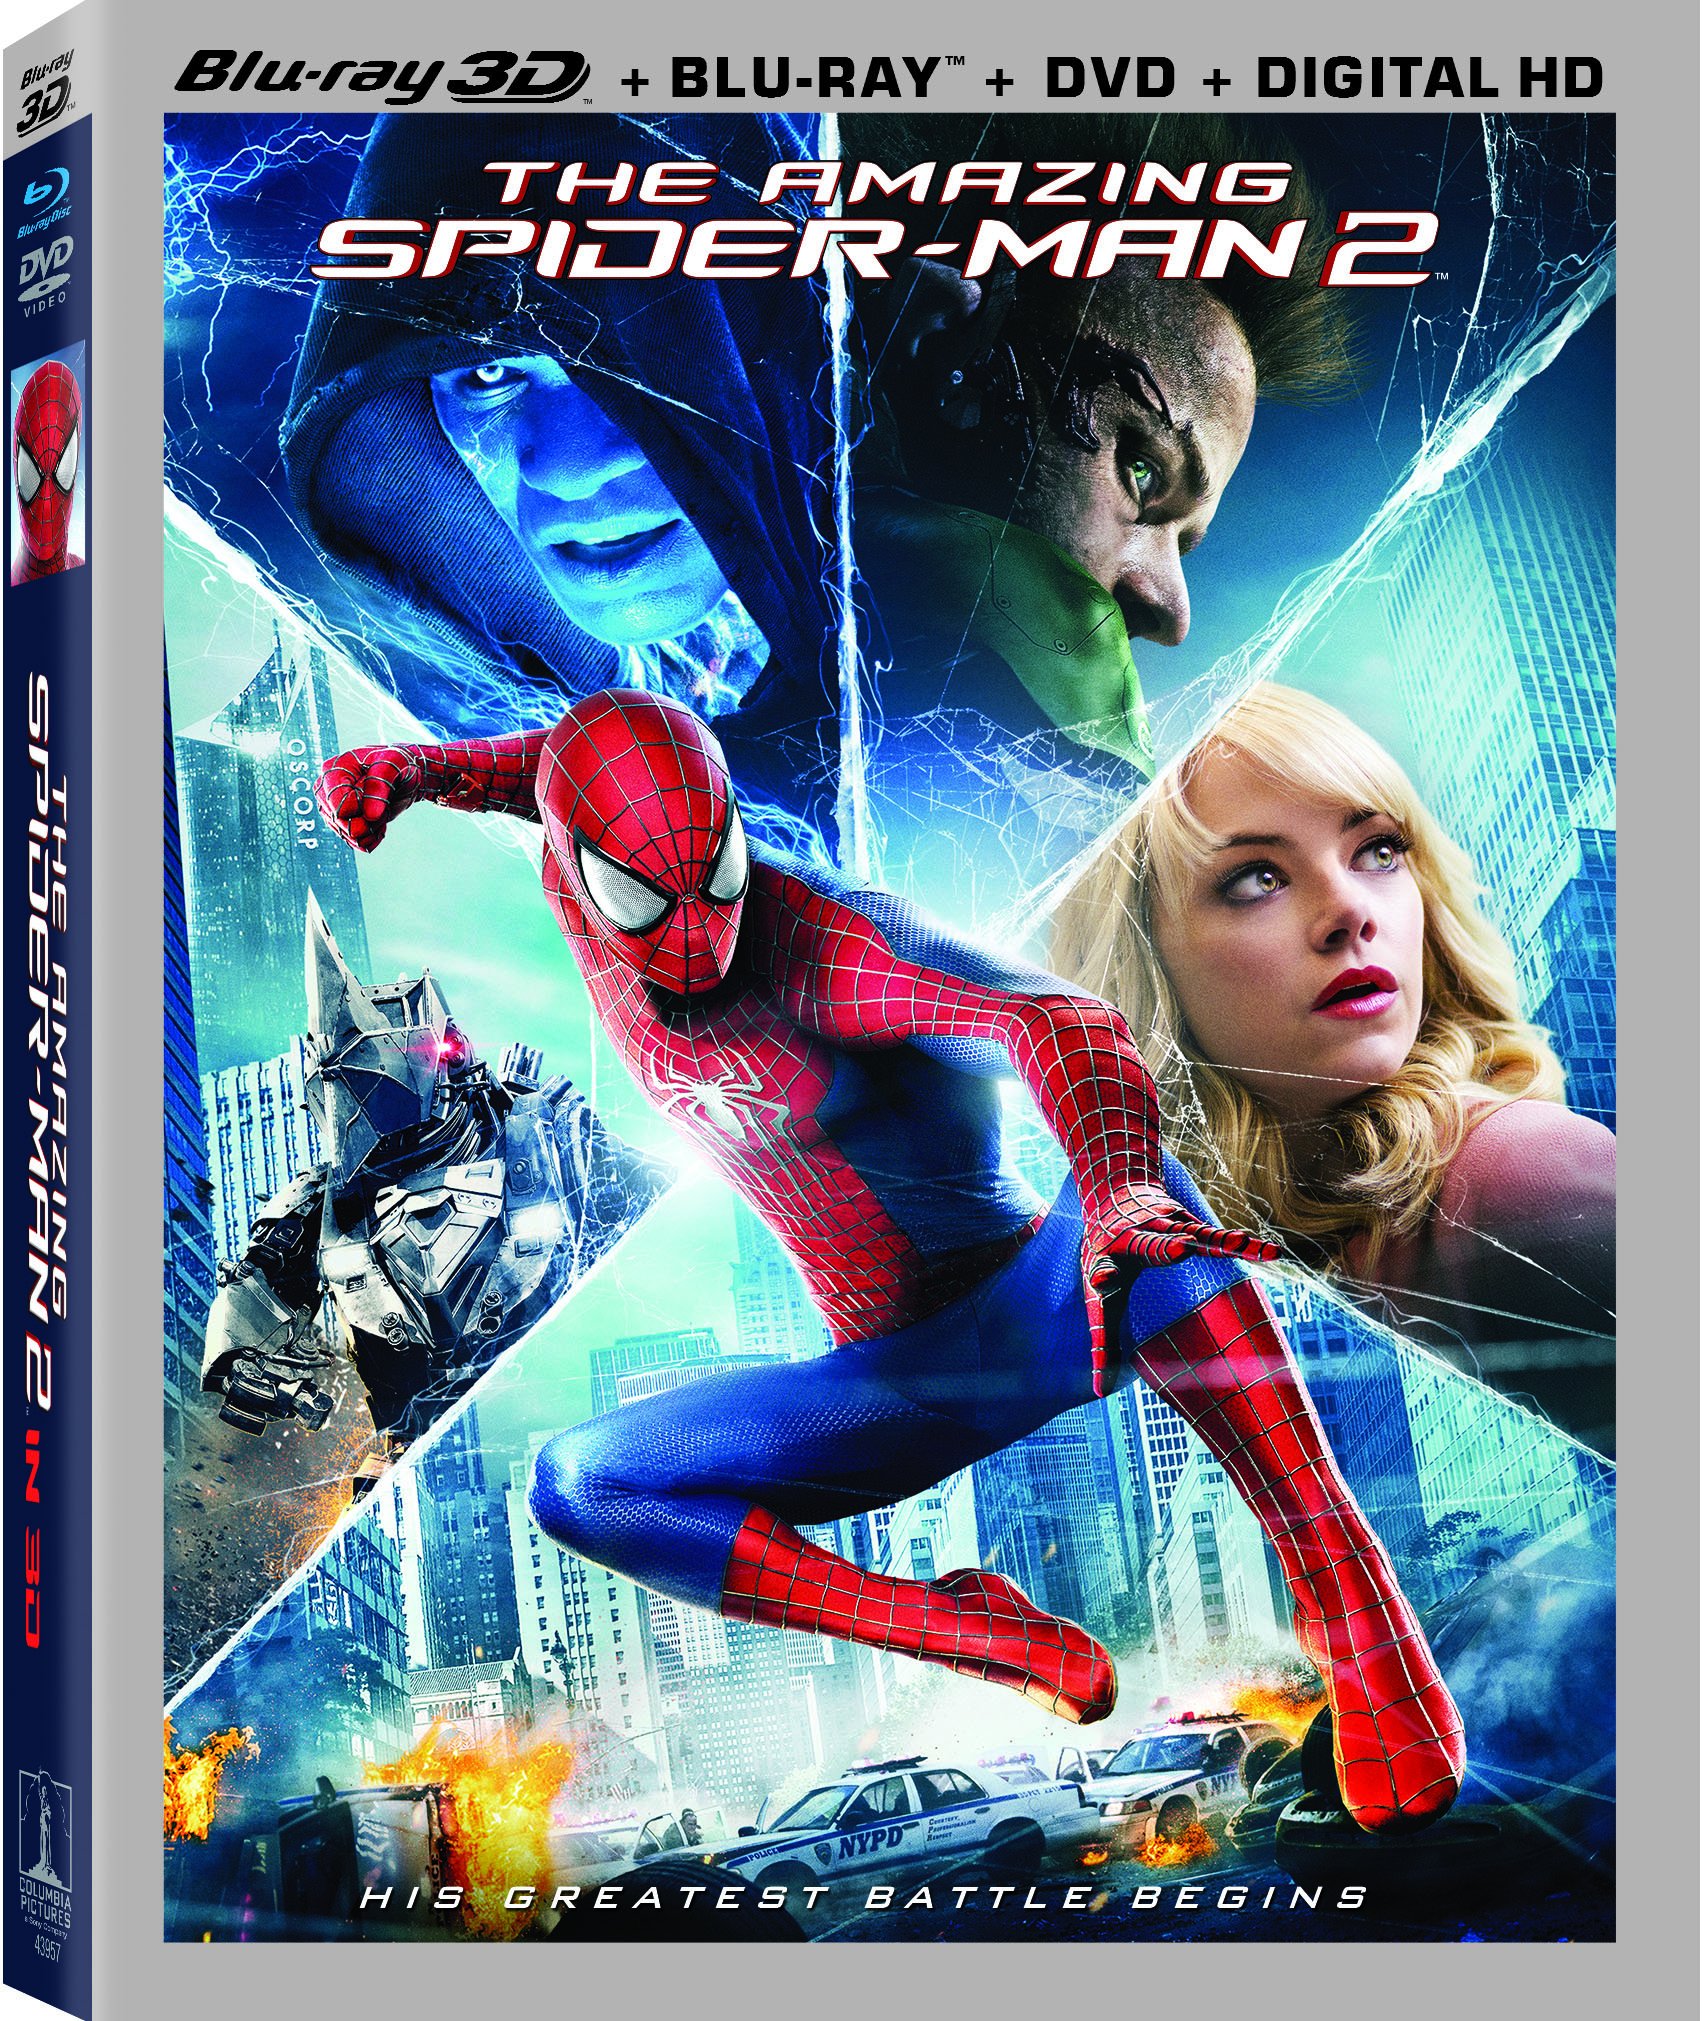 The Amazing Spider-Man 2 DVD Release Date August 19, 20141703 x 2021